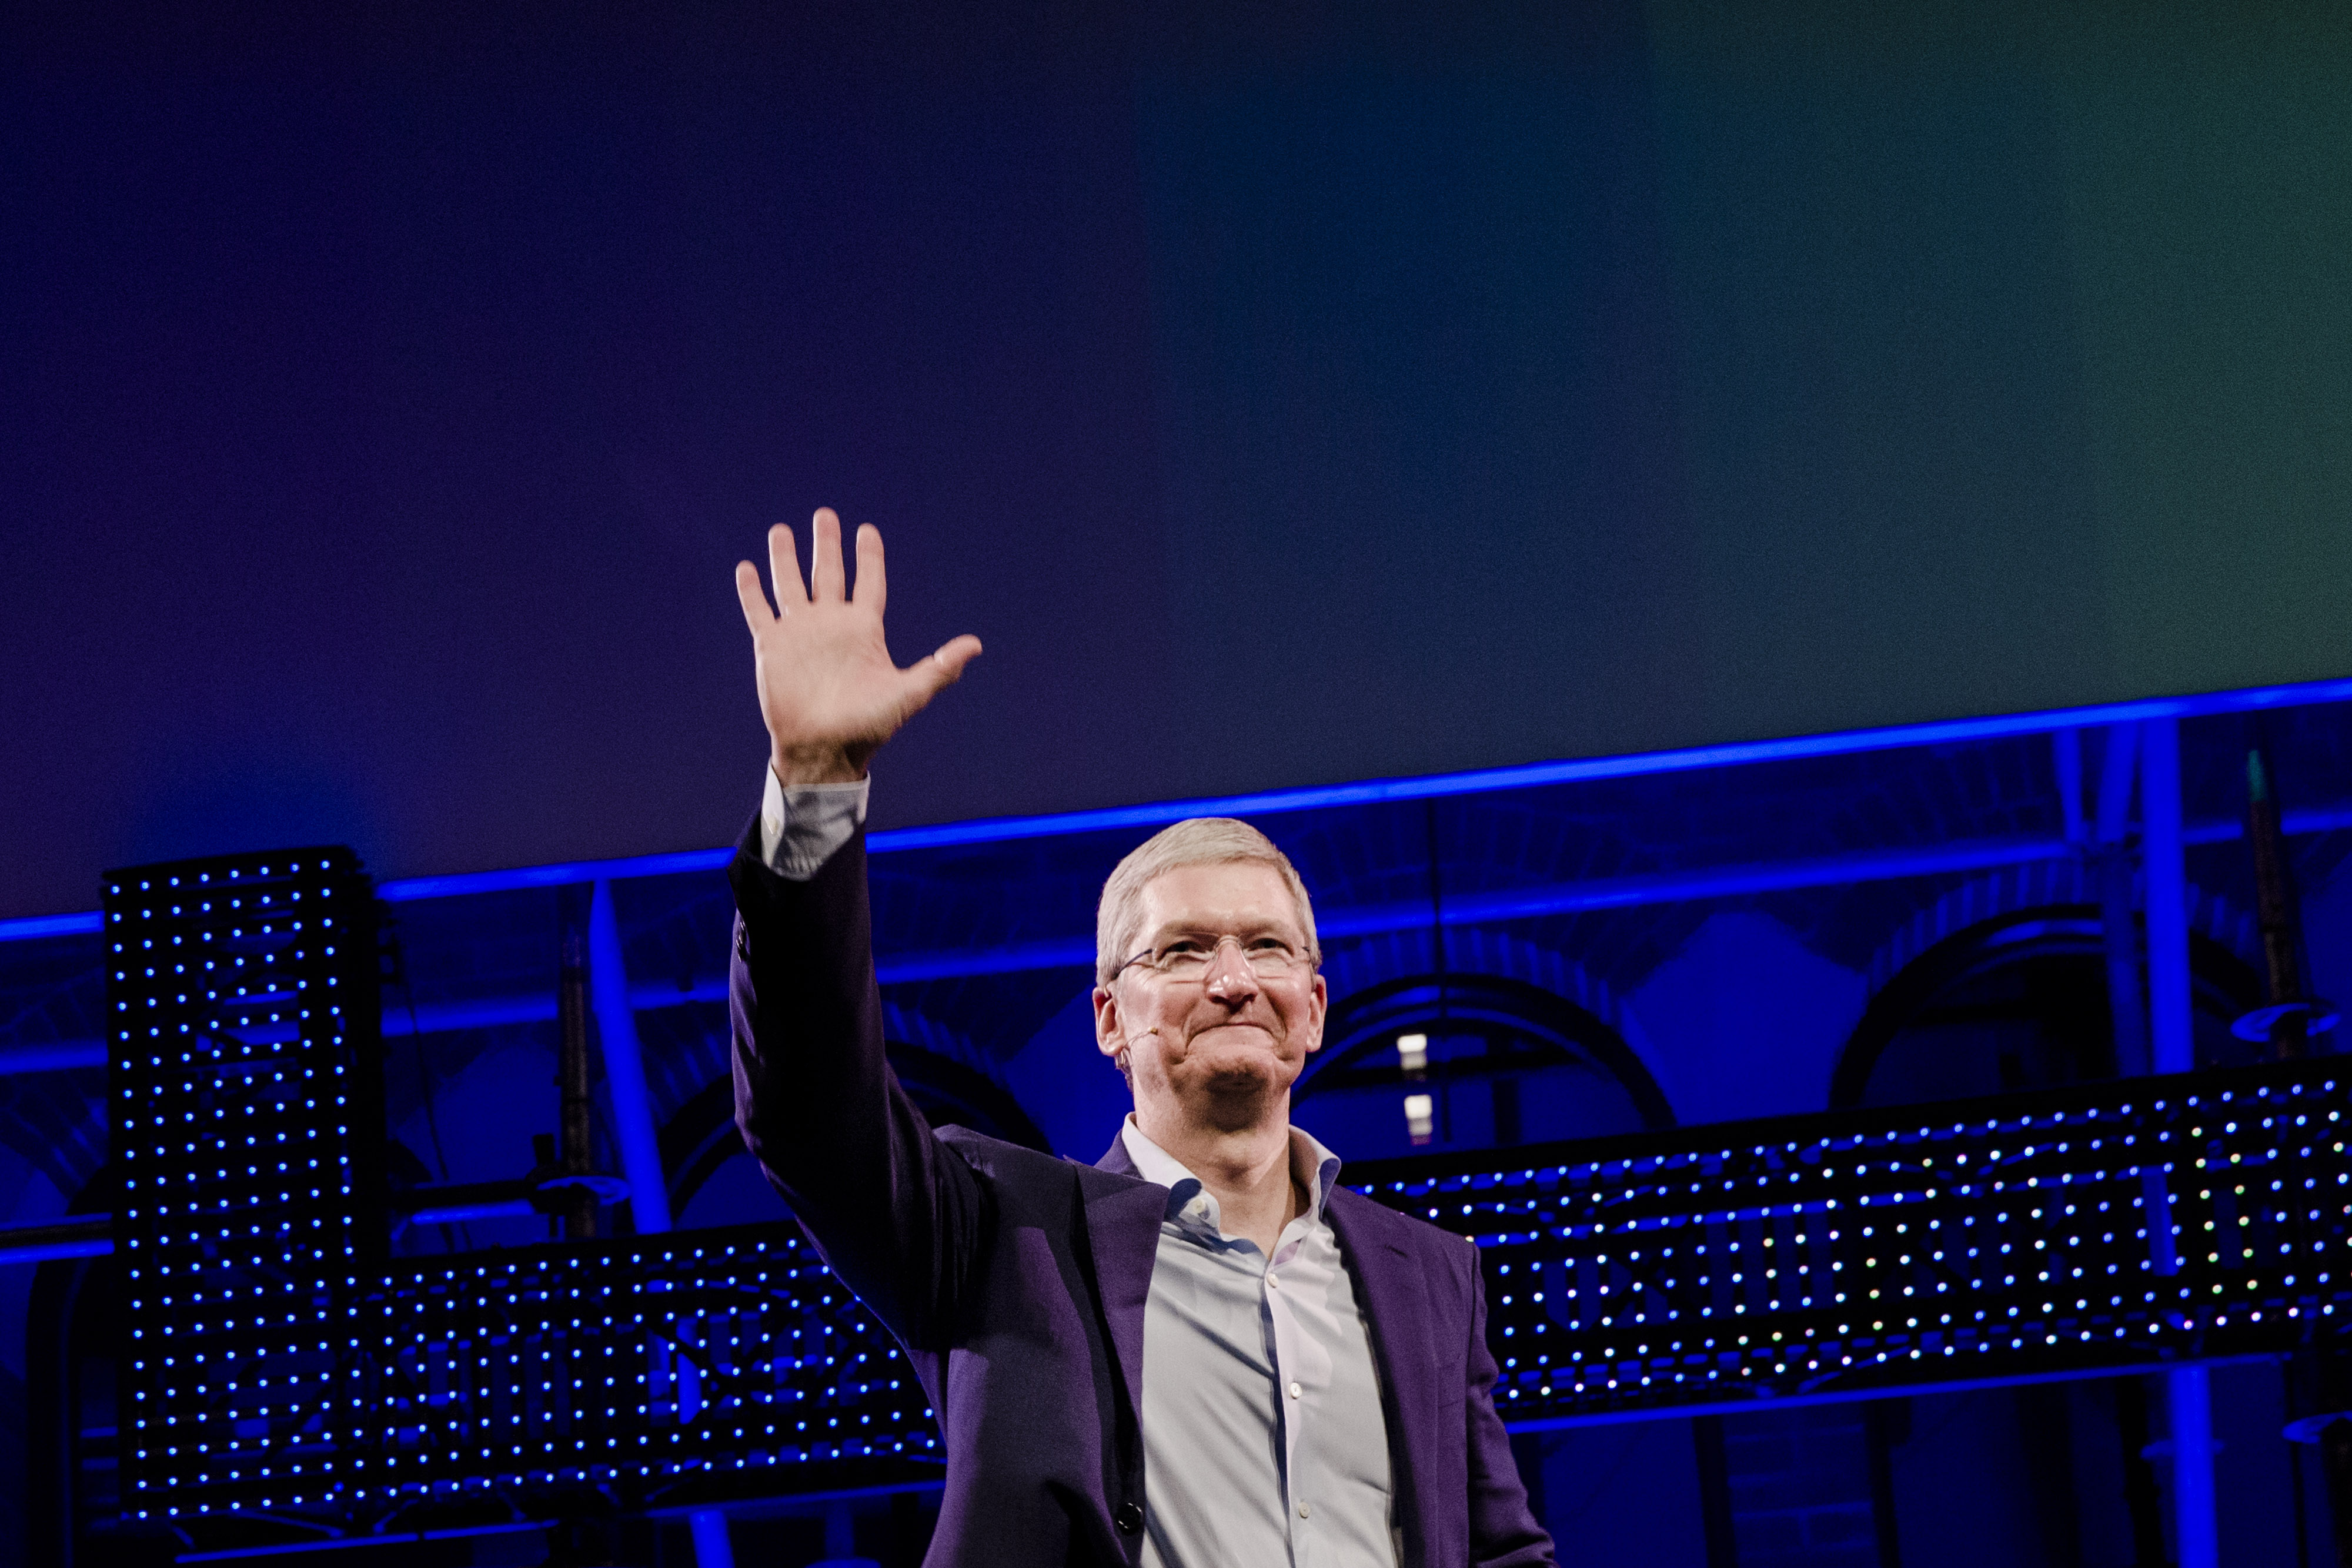 Tim Cook, chief executive officer of Apple Inc., waves to the audience during the opening of "Startup Fest", a five-day conference to showcase Dutch innovation, in Amsterdam, Netherlands, on Tuesday, May 24, 2016. (Marlene Awaad—Bloomberg/Getty Images)